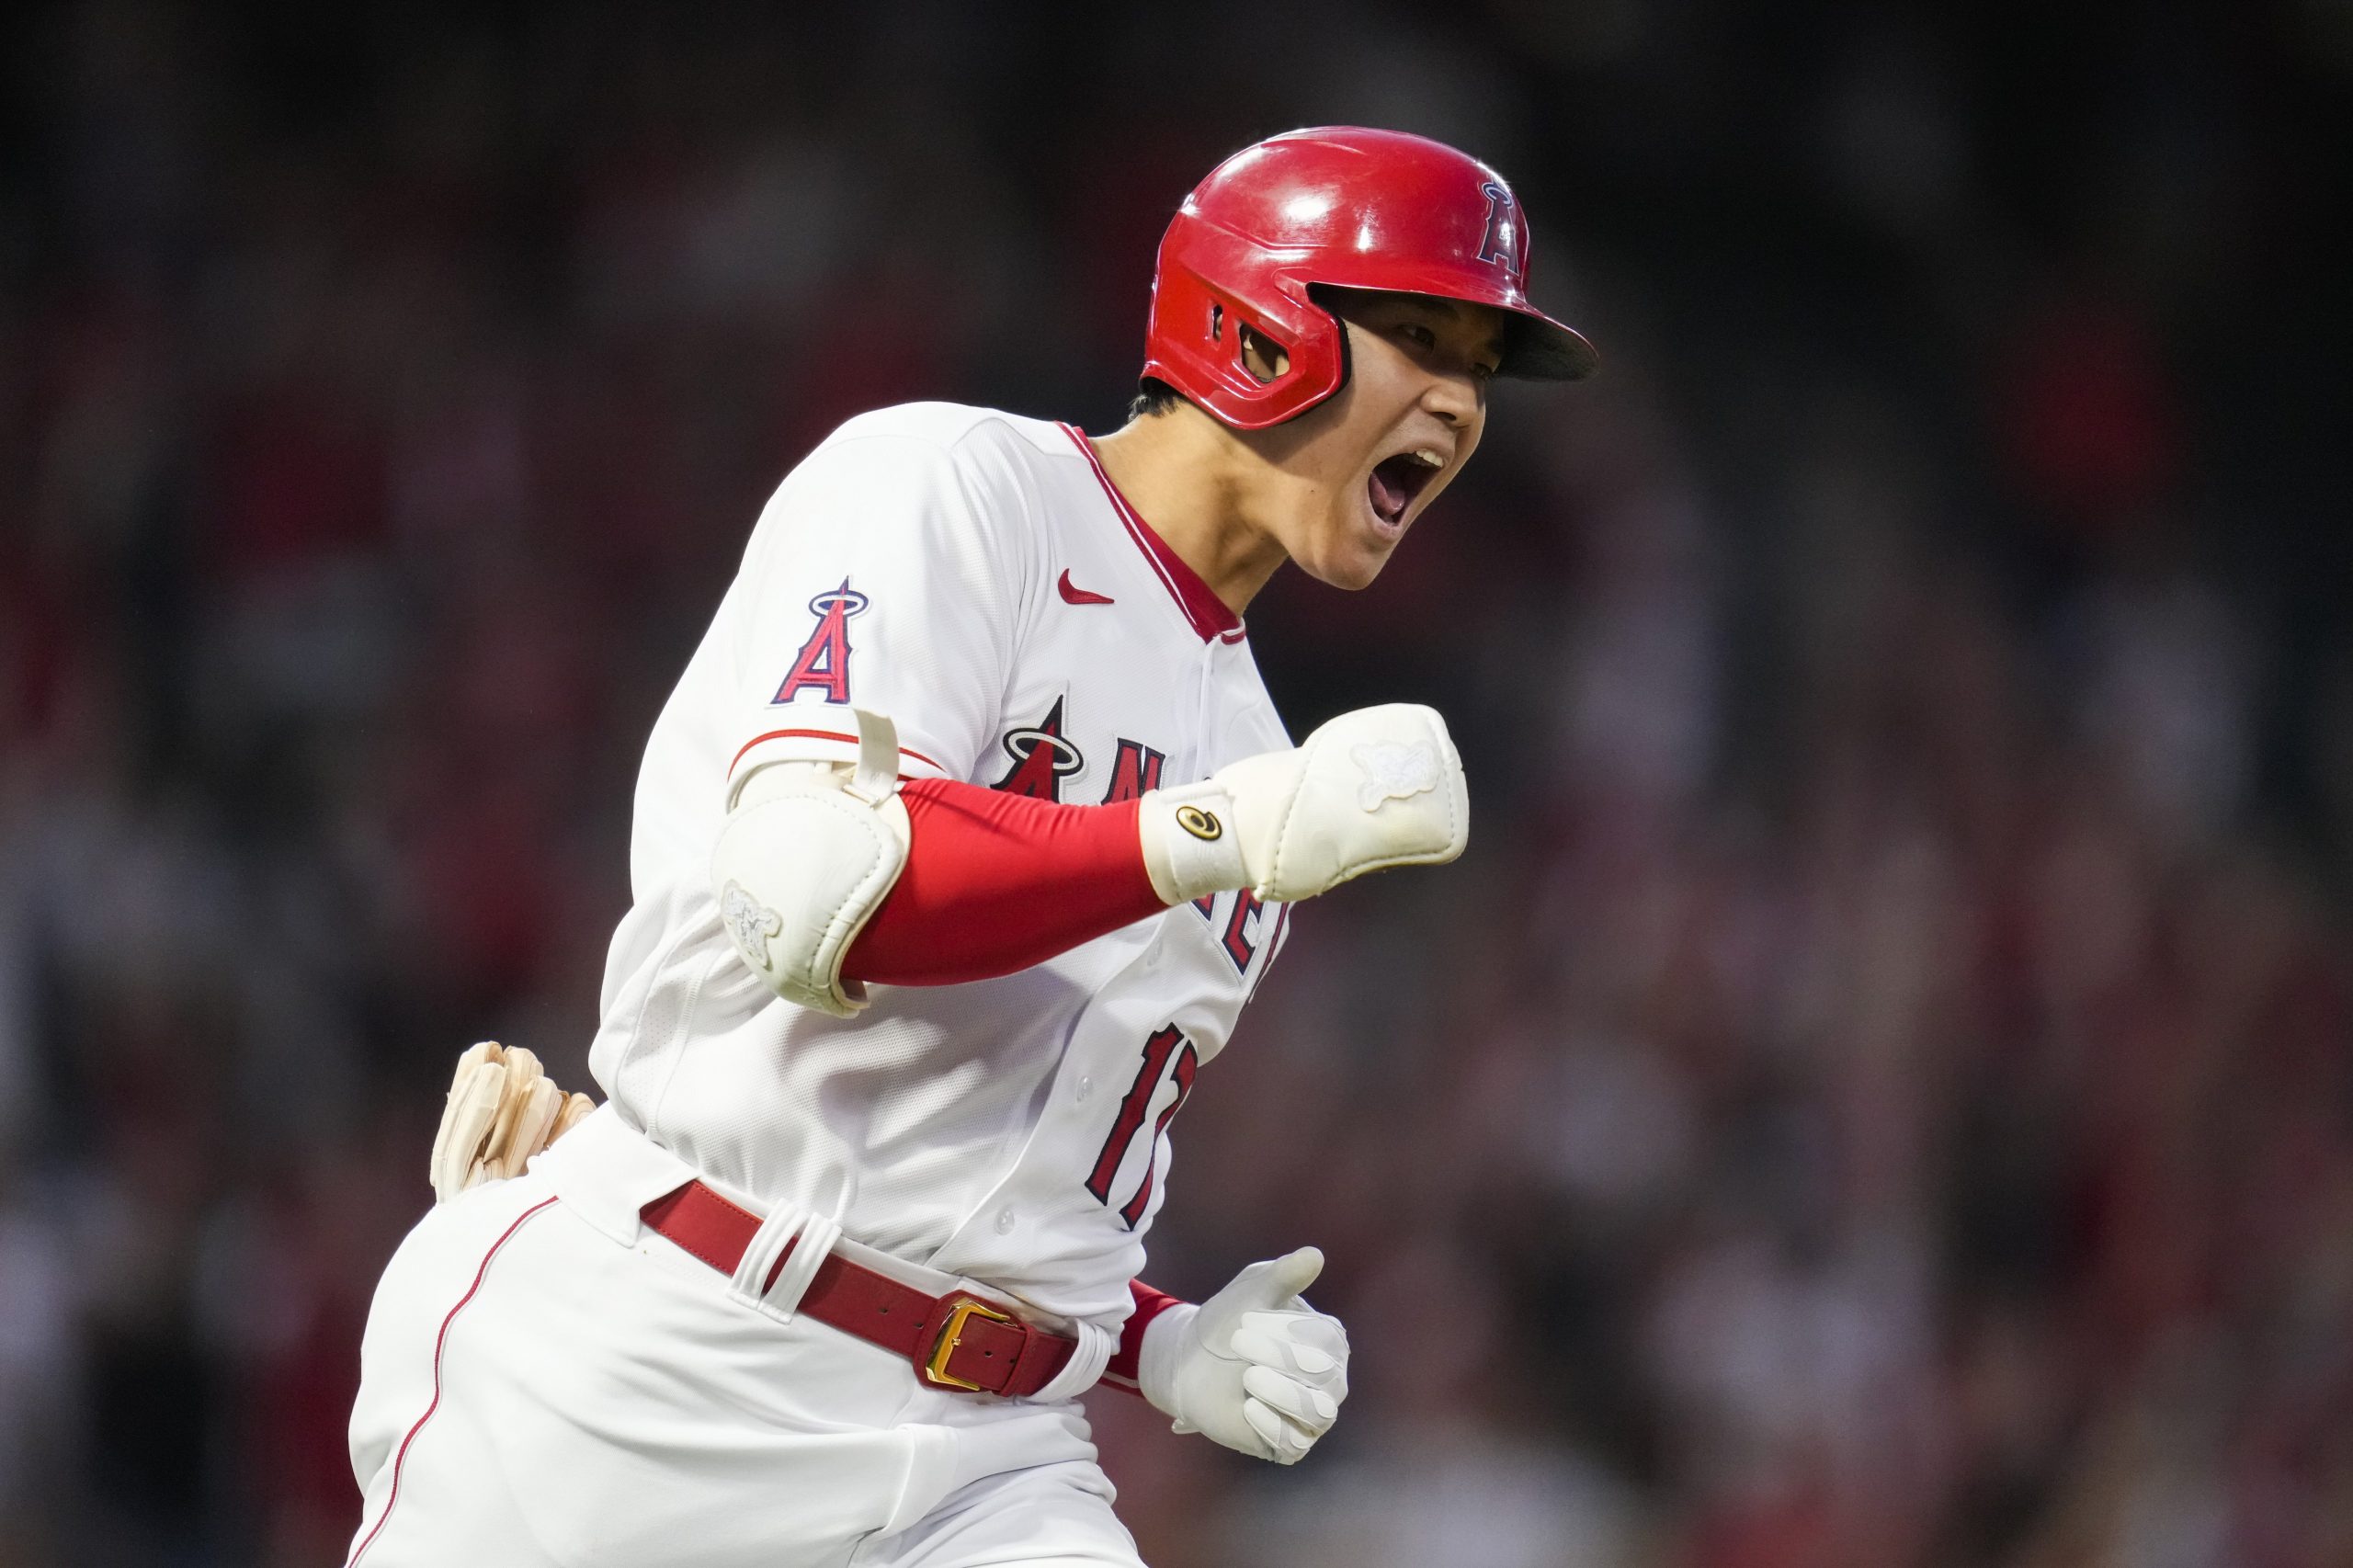 Los Angeles Angels designated hitter Shohei Ohtani (17) reacts as he runs the bases after hitting a home run during the fourth inning of a baseball game against the Baltimore Orioles Friday, July 2, 2021, in Anaheim. David Fletcher also scored.